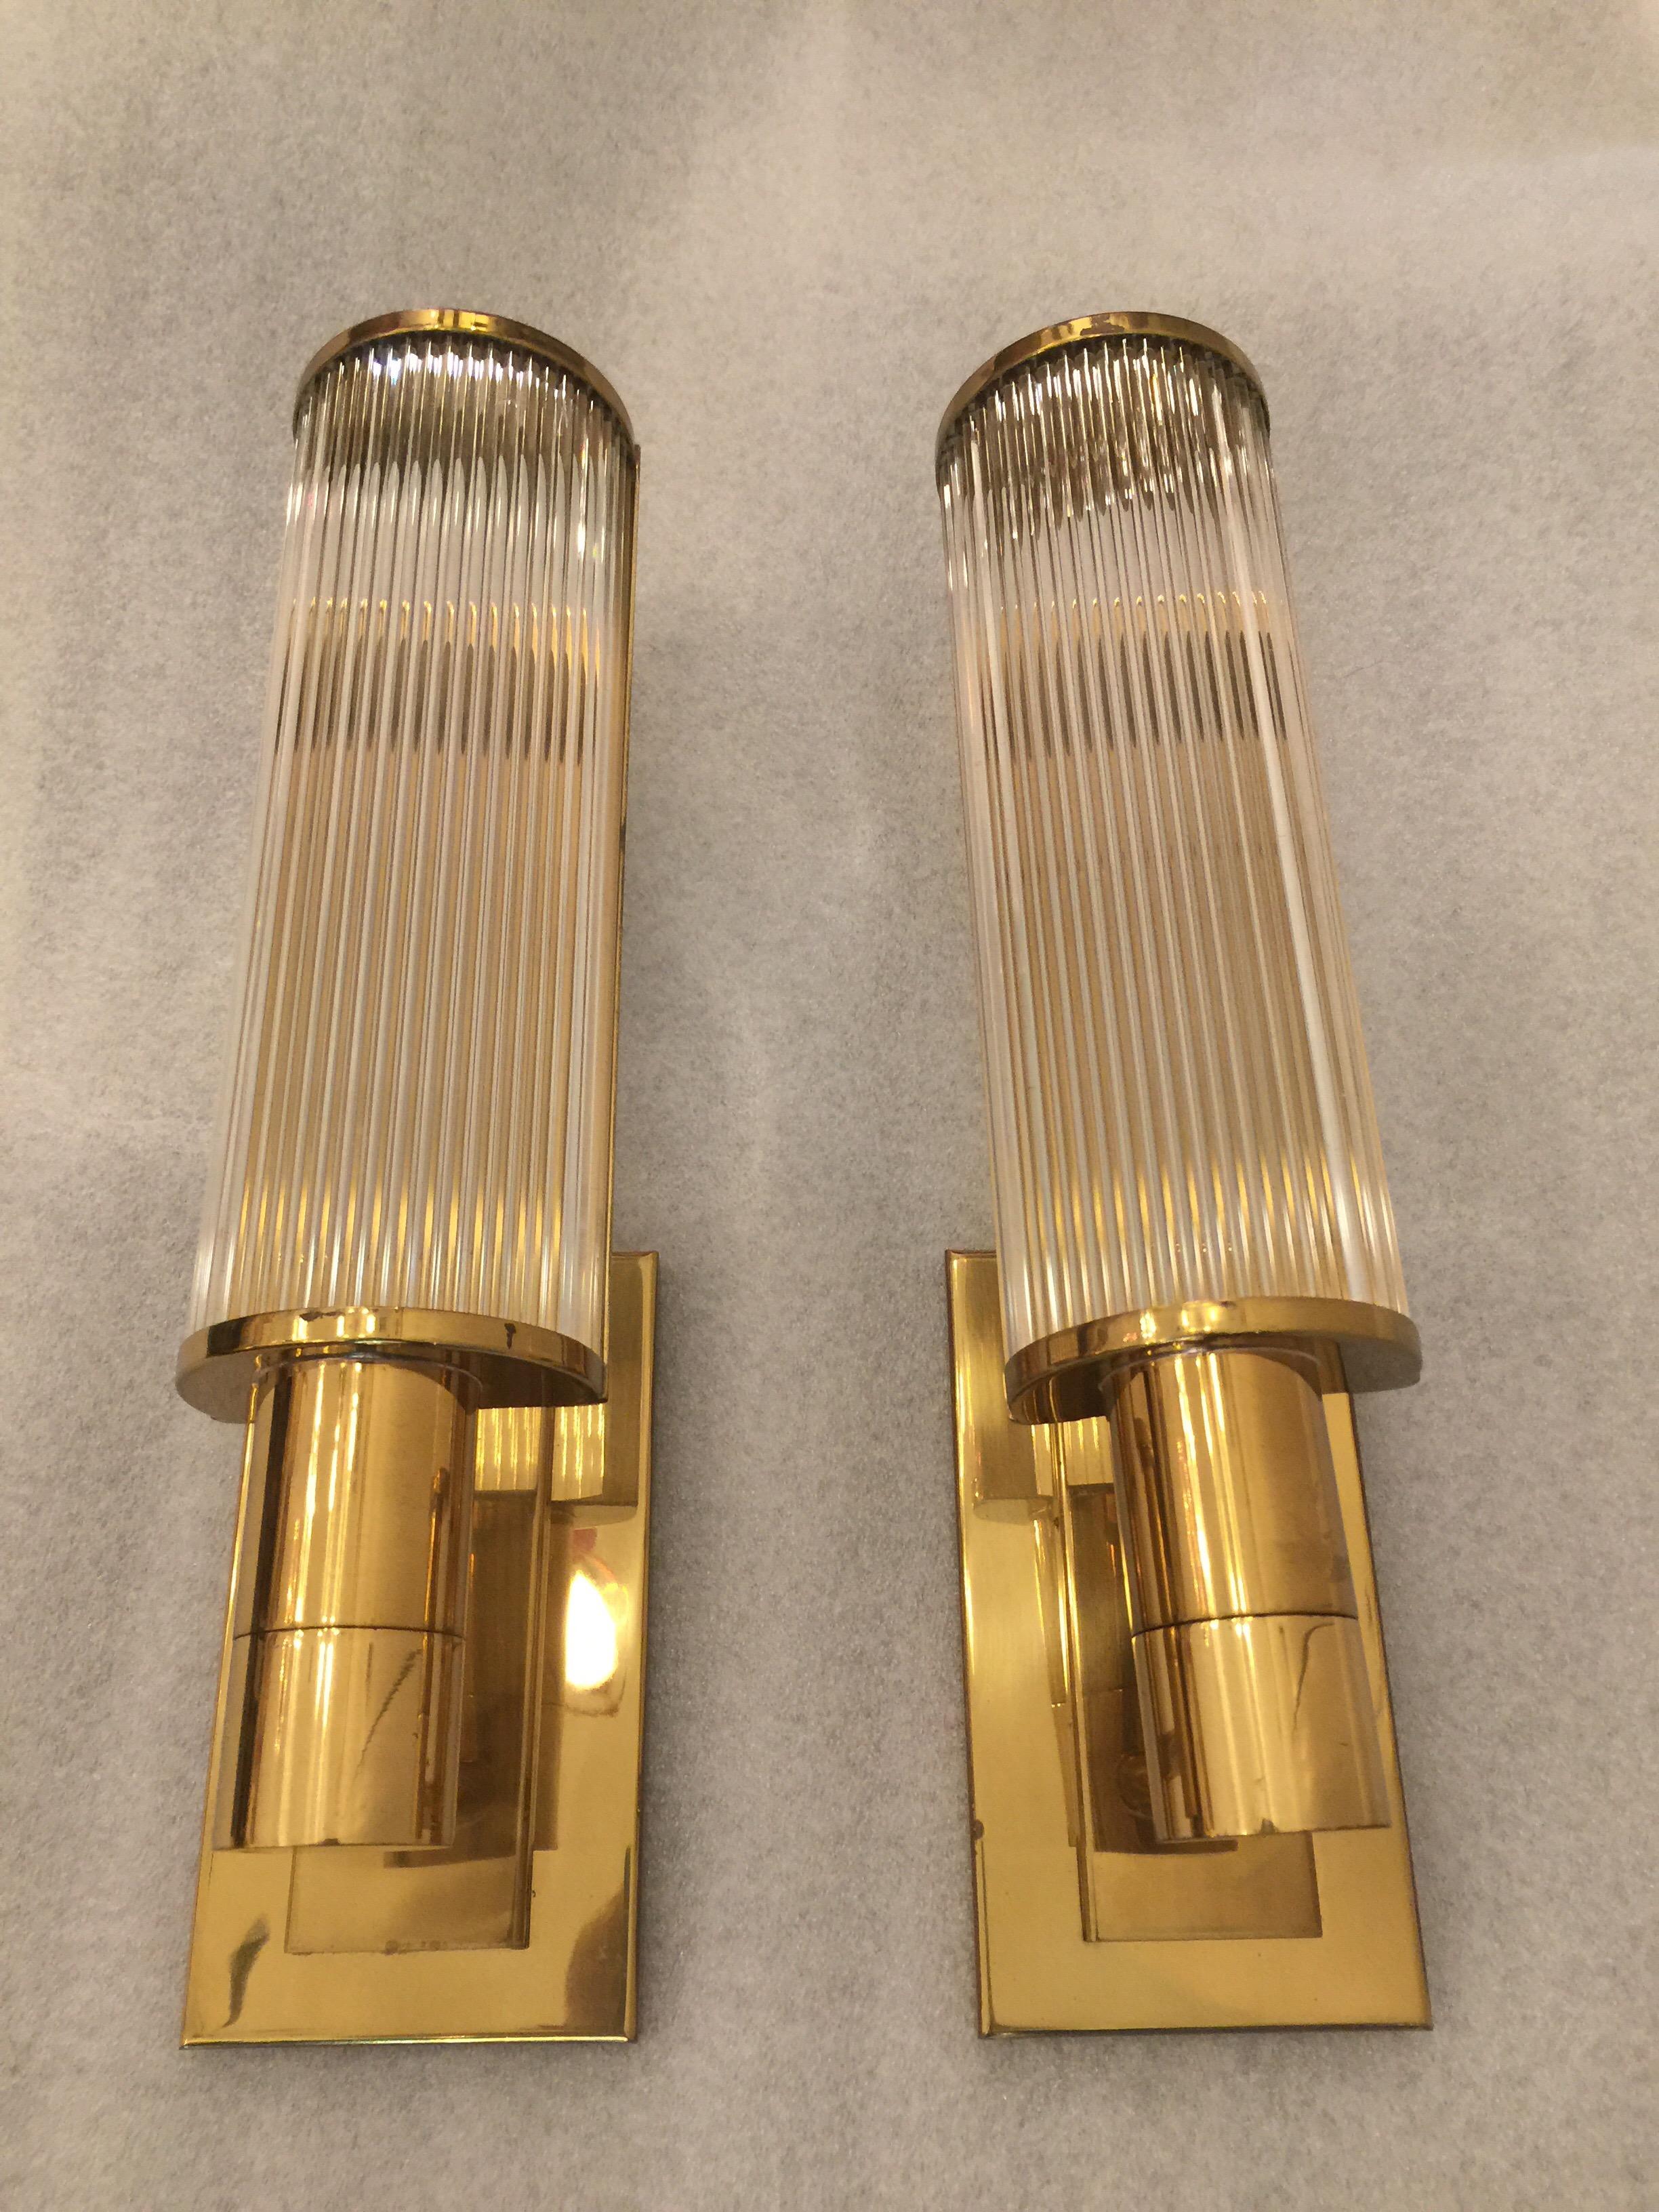 High quality pair of sconces by Casella Lighting in the Art Deco style featuring glass rod detail. In good vintage working condition.